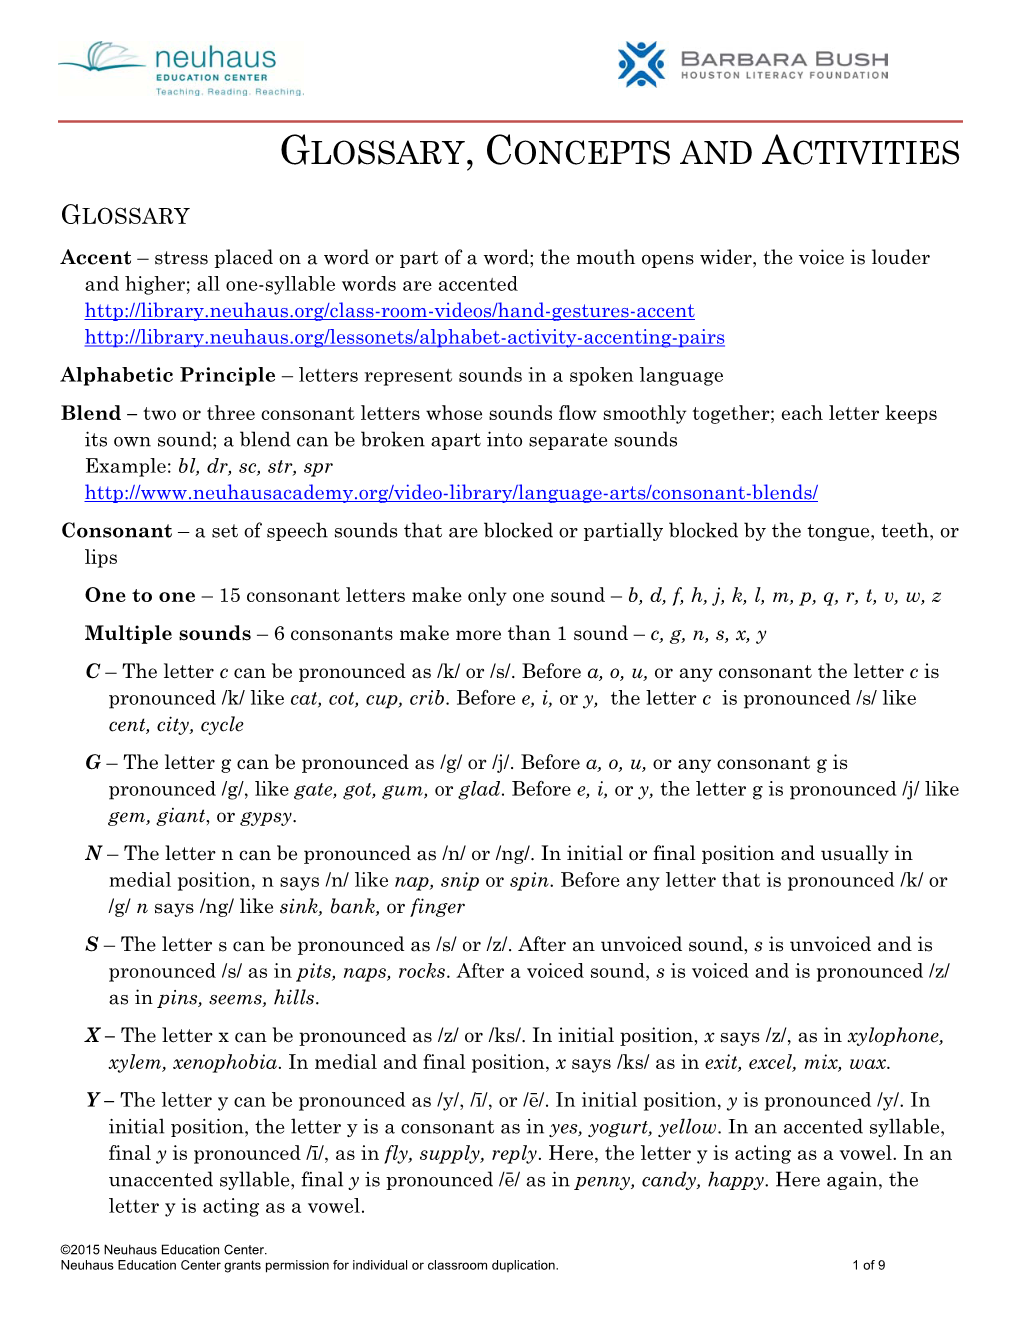 Glossary, Concepts and Activities